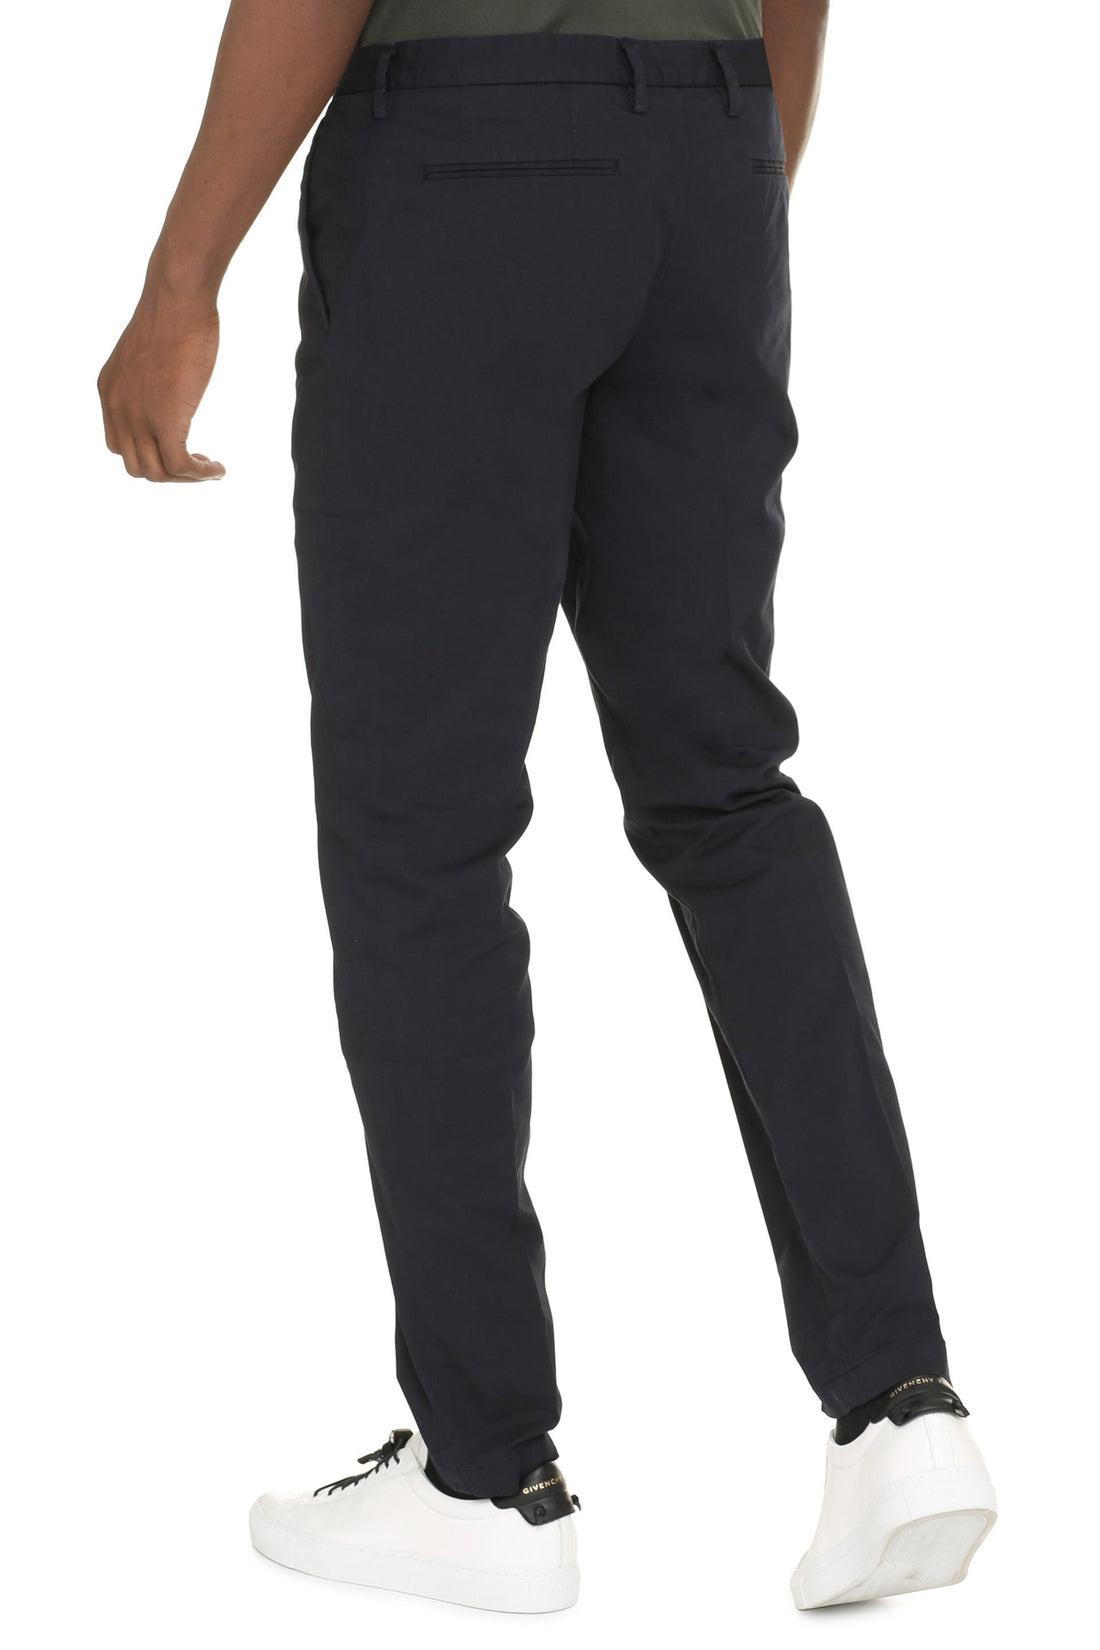 BOSS-OUTLET-SALE-Stretch cotton chino trousers-ARCHIVIST